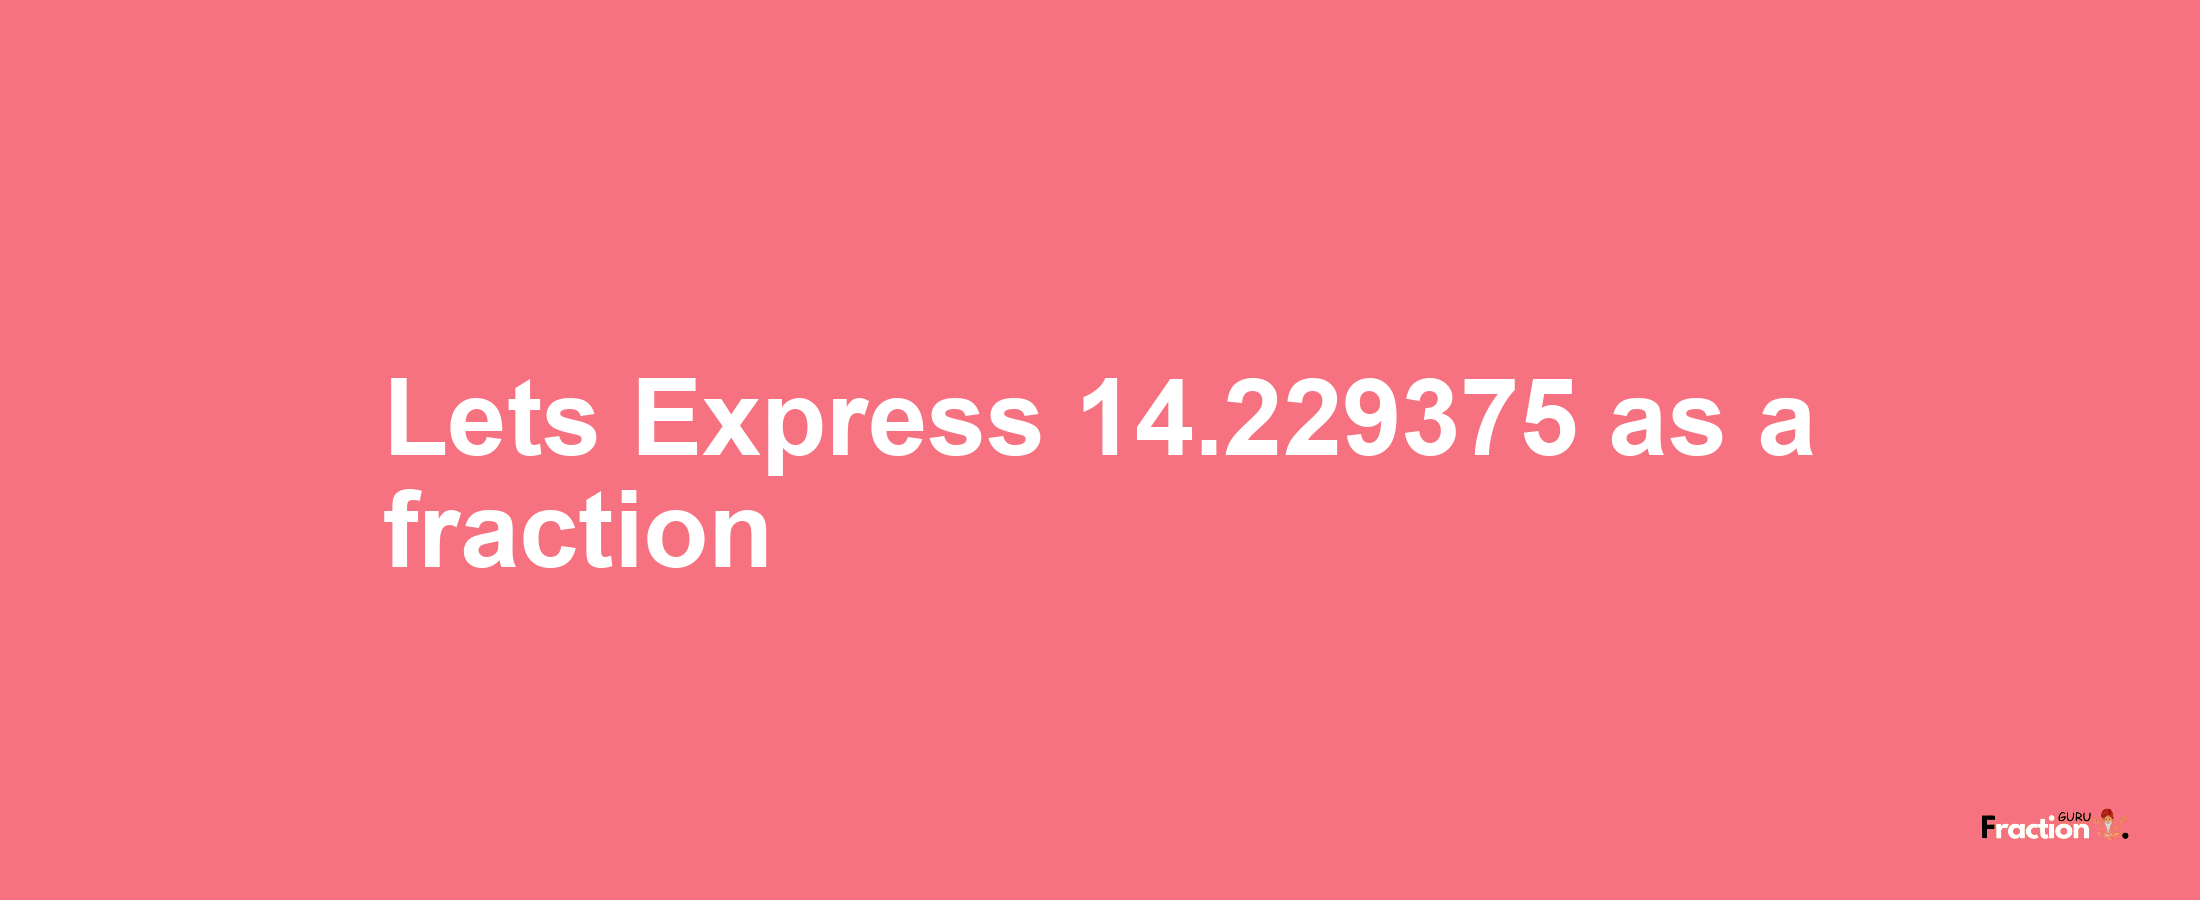 Lets Express 14.229375 as afraction